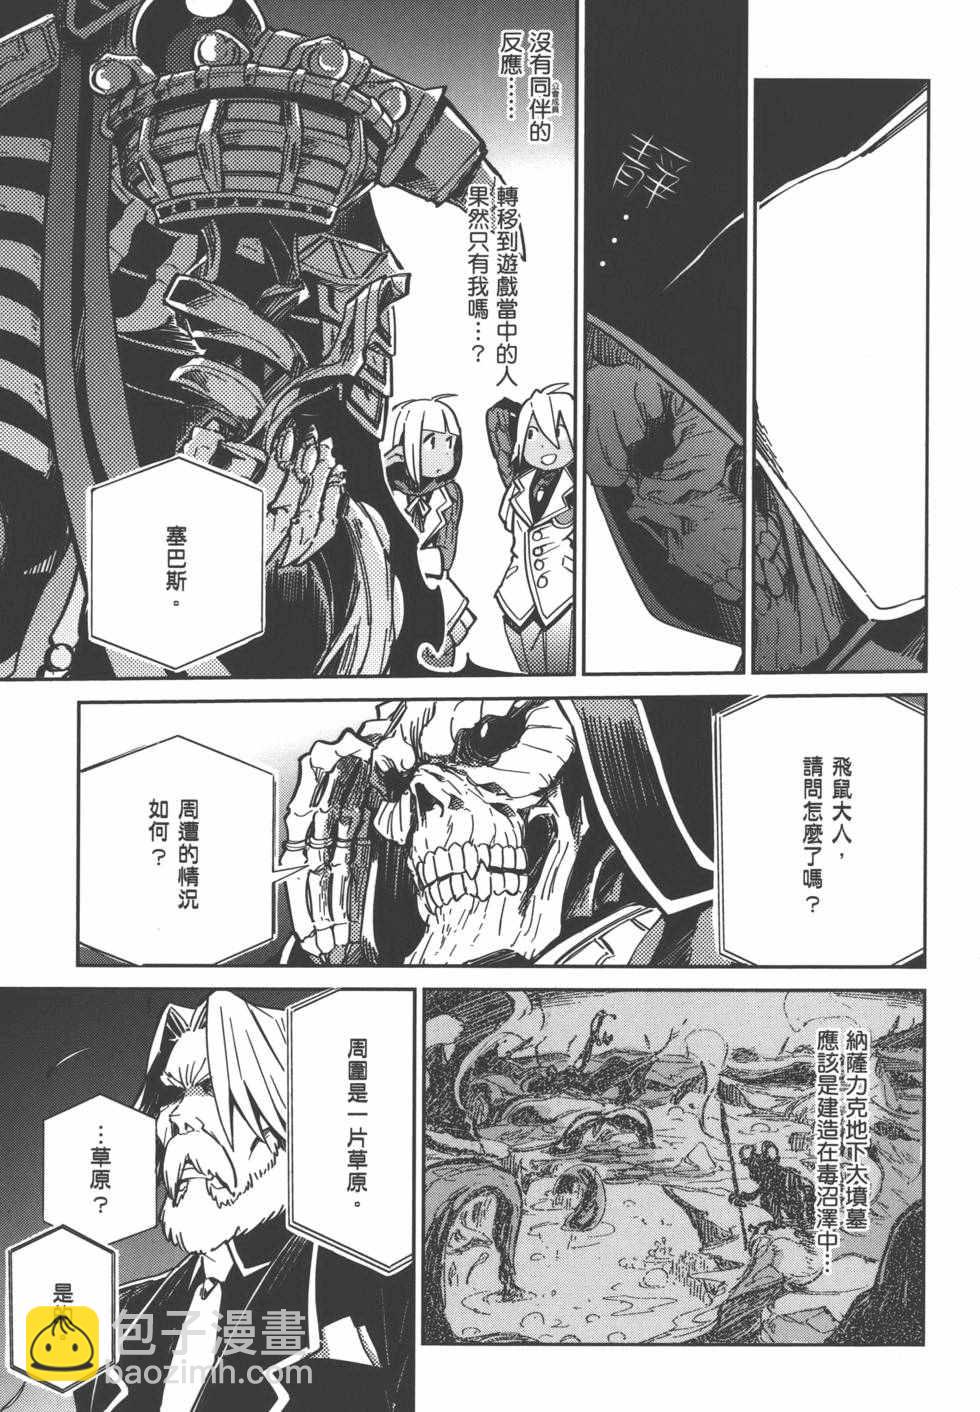 OVERLORD - 第1卷(1/4) - 1